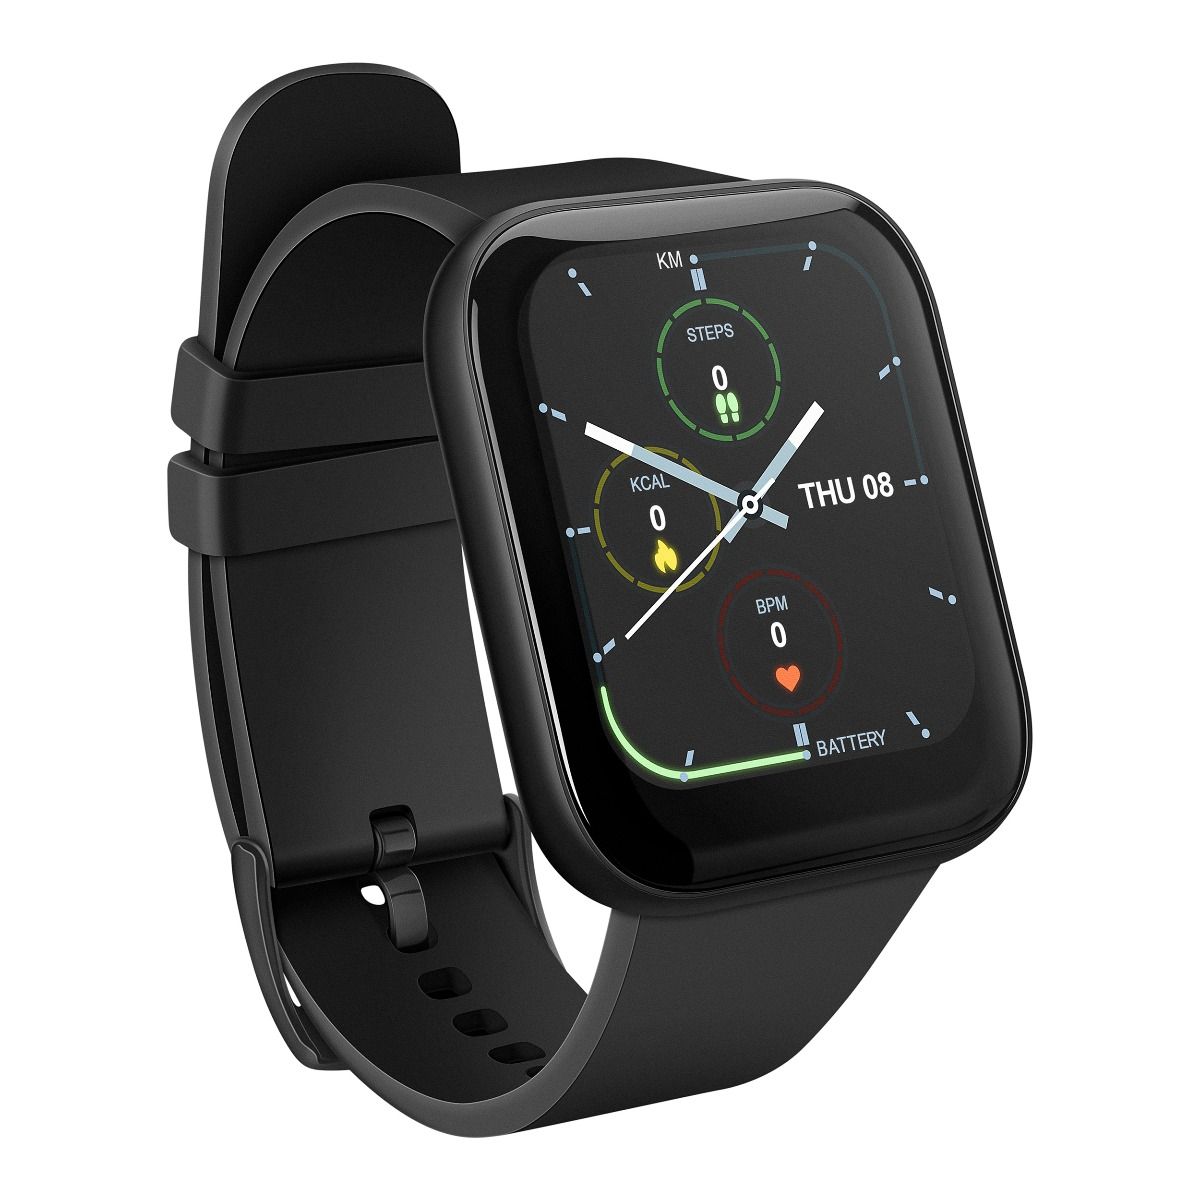 Smart Watch Bluetooth con pantalla Full Touch